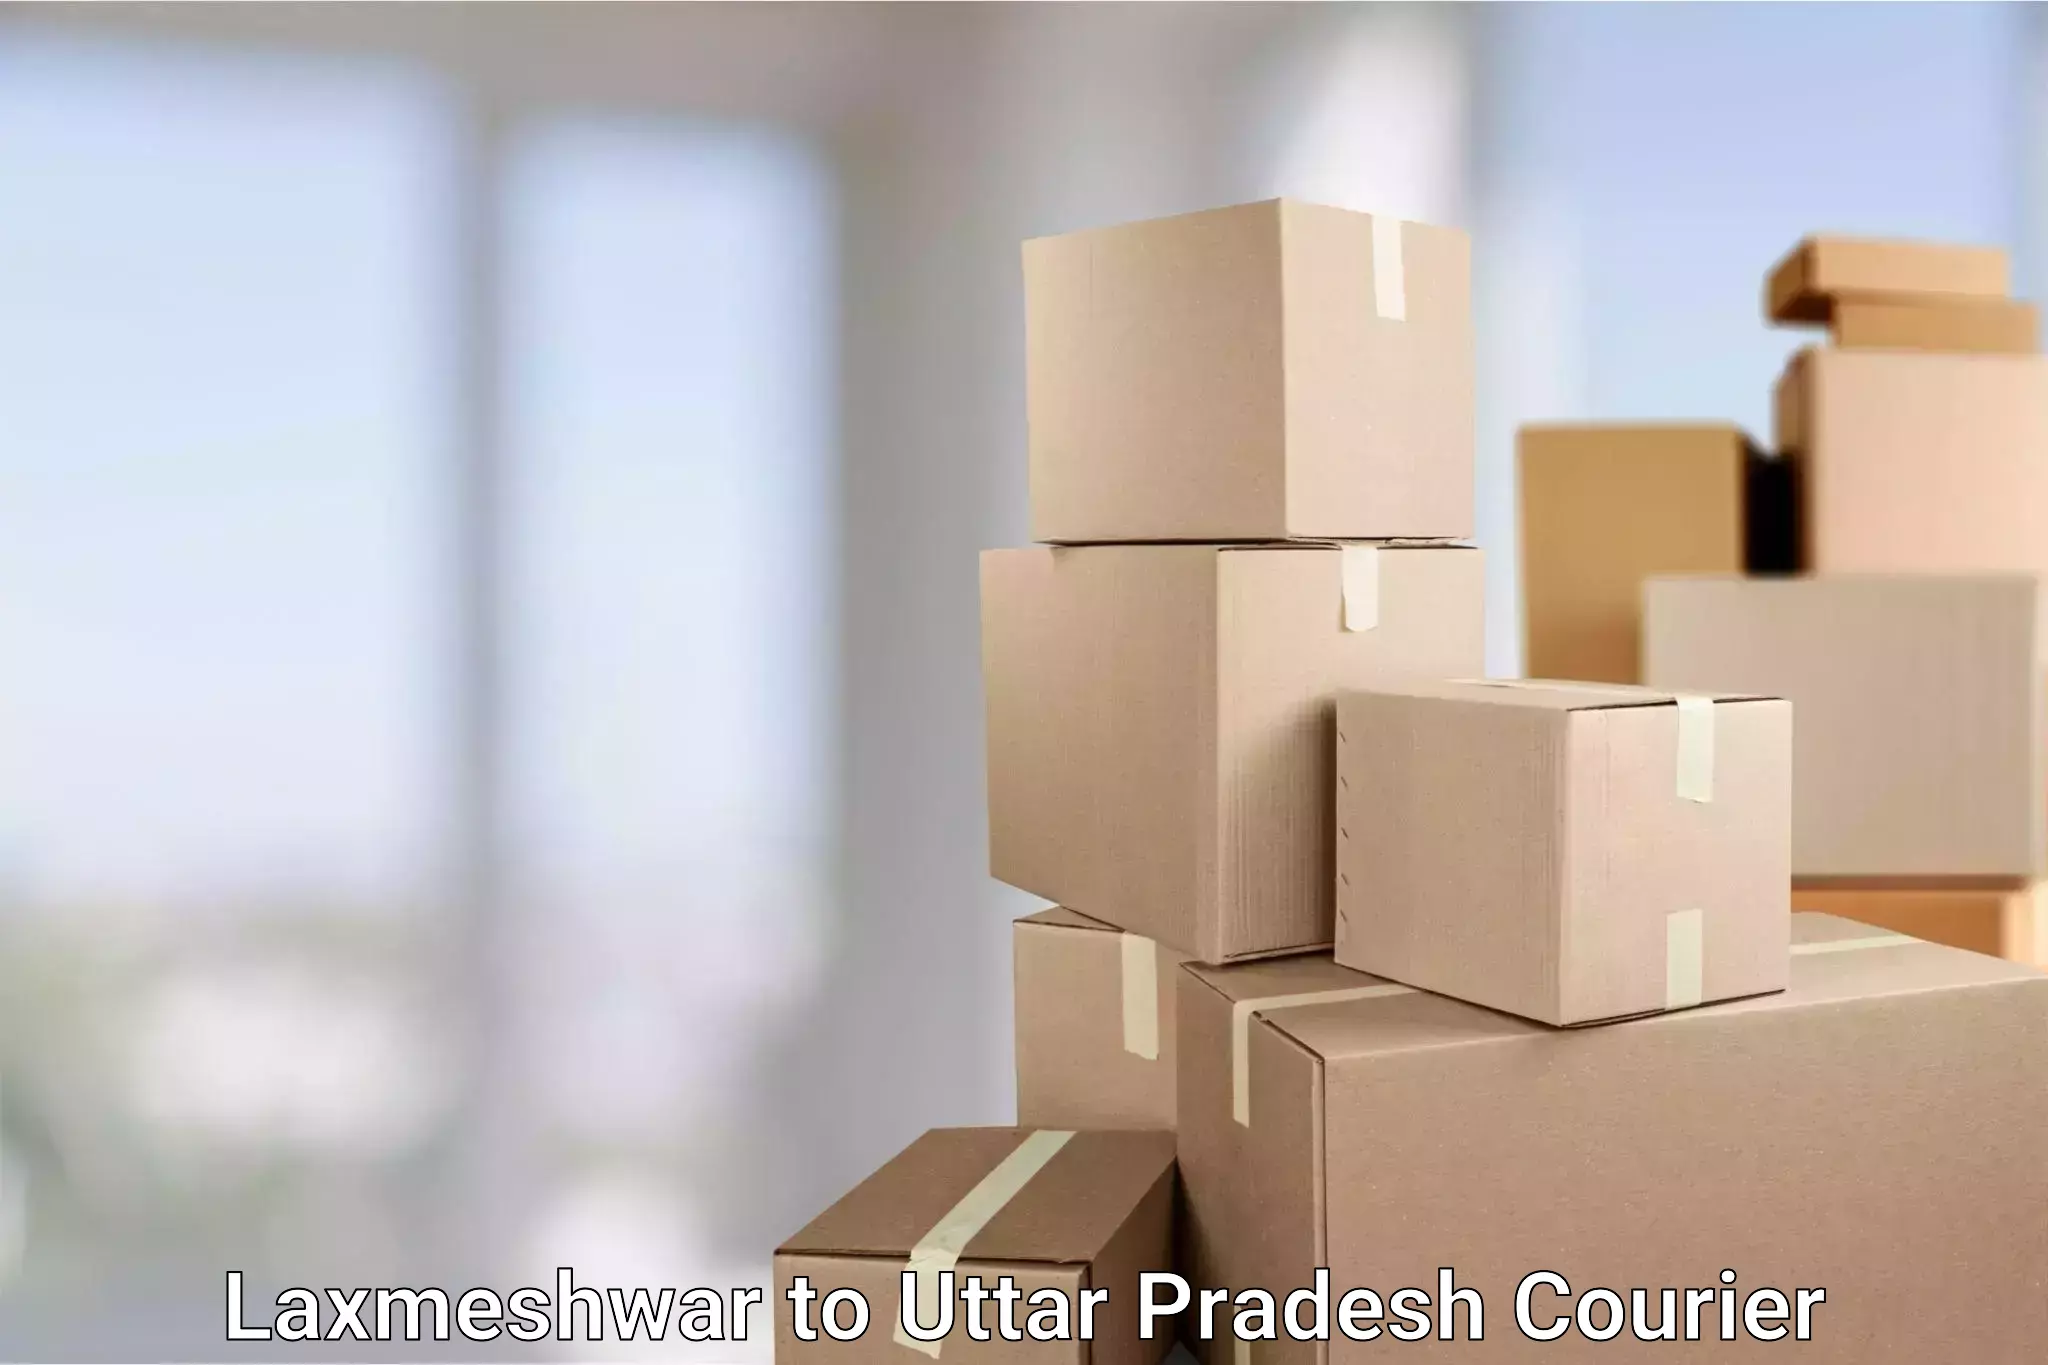 Personal parcel delivery in Laxmeshwar to IIIT Lucknow